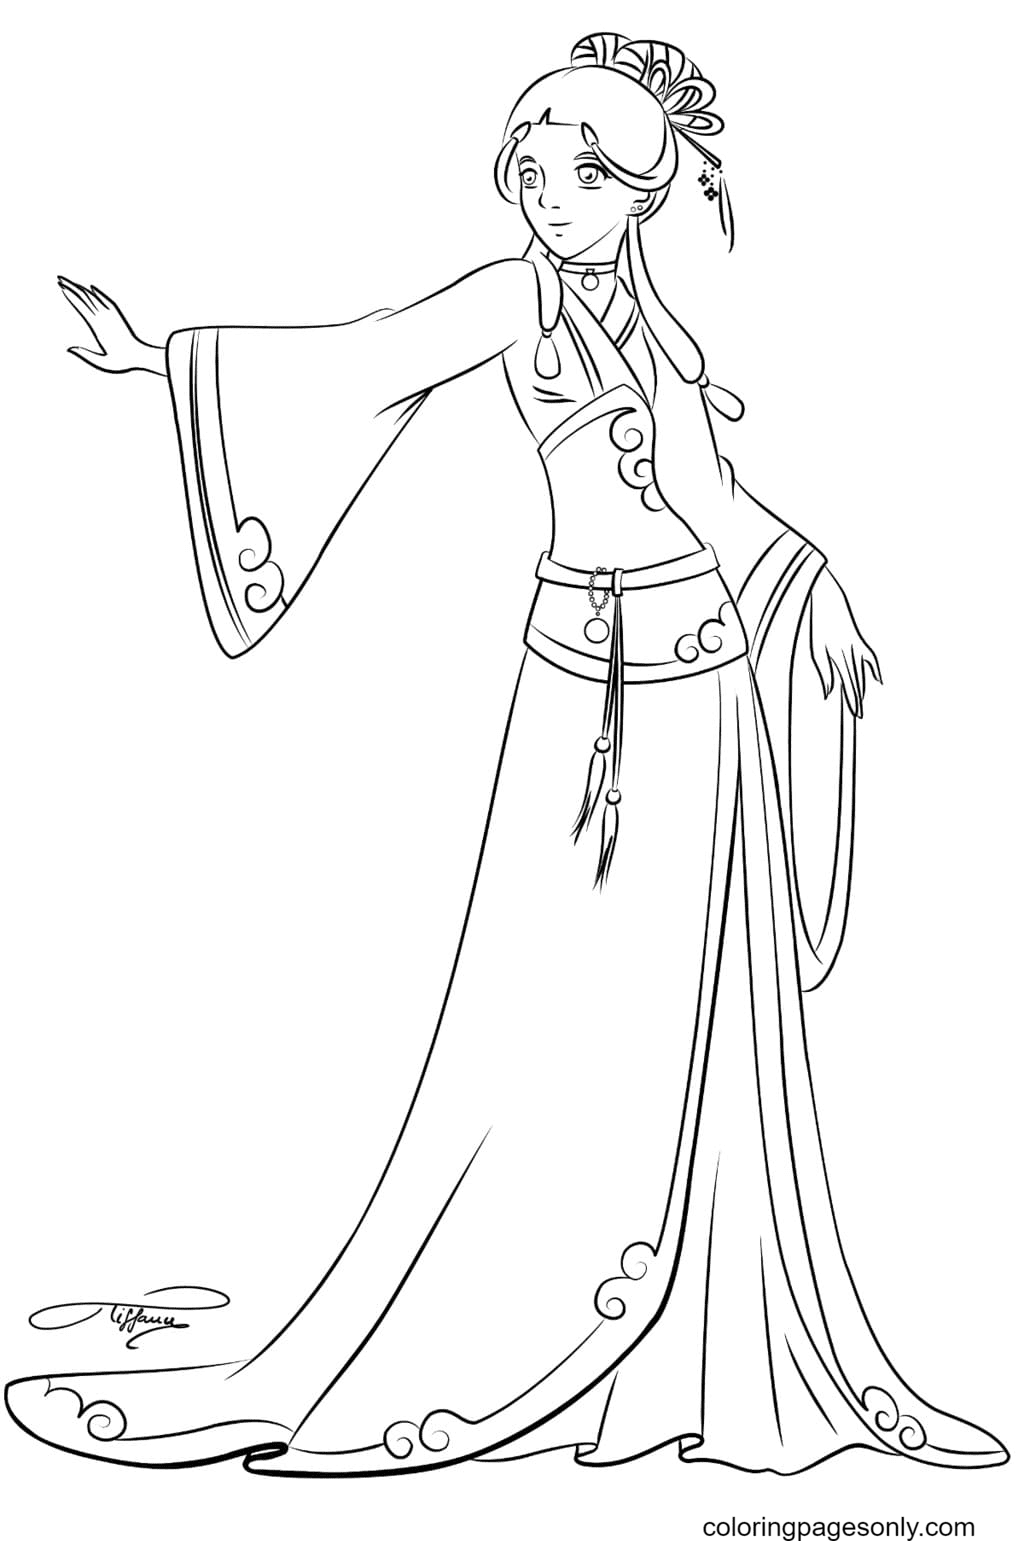 Katara from Avatar the Last Airbender Coloring Pages